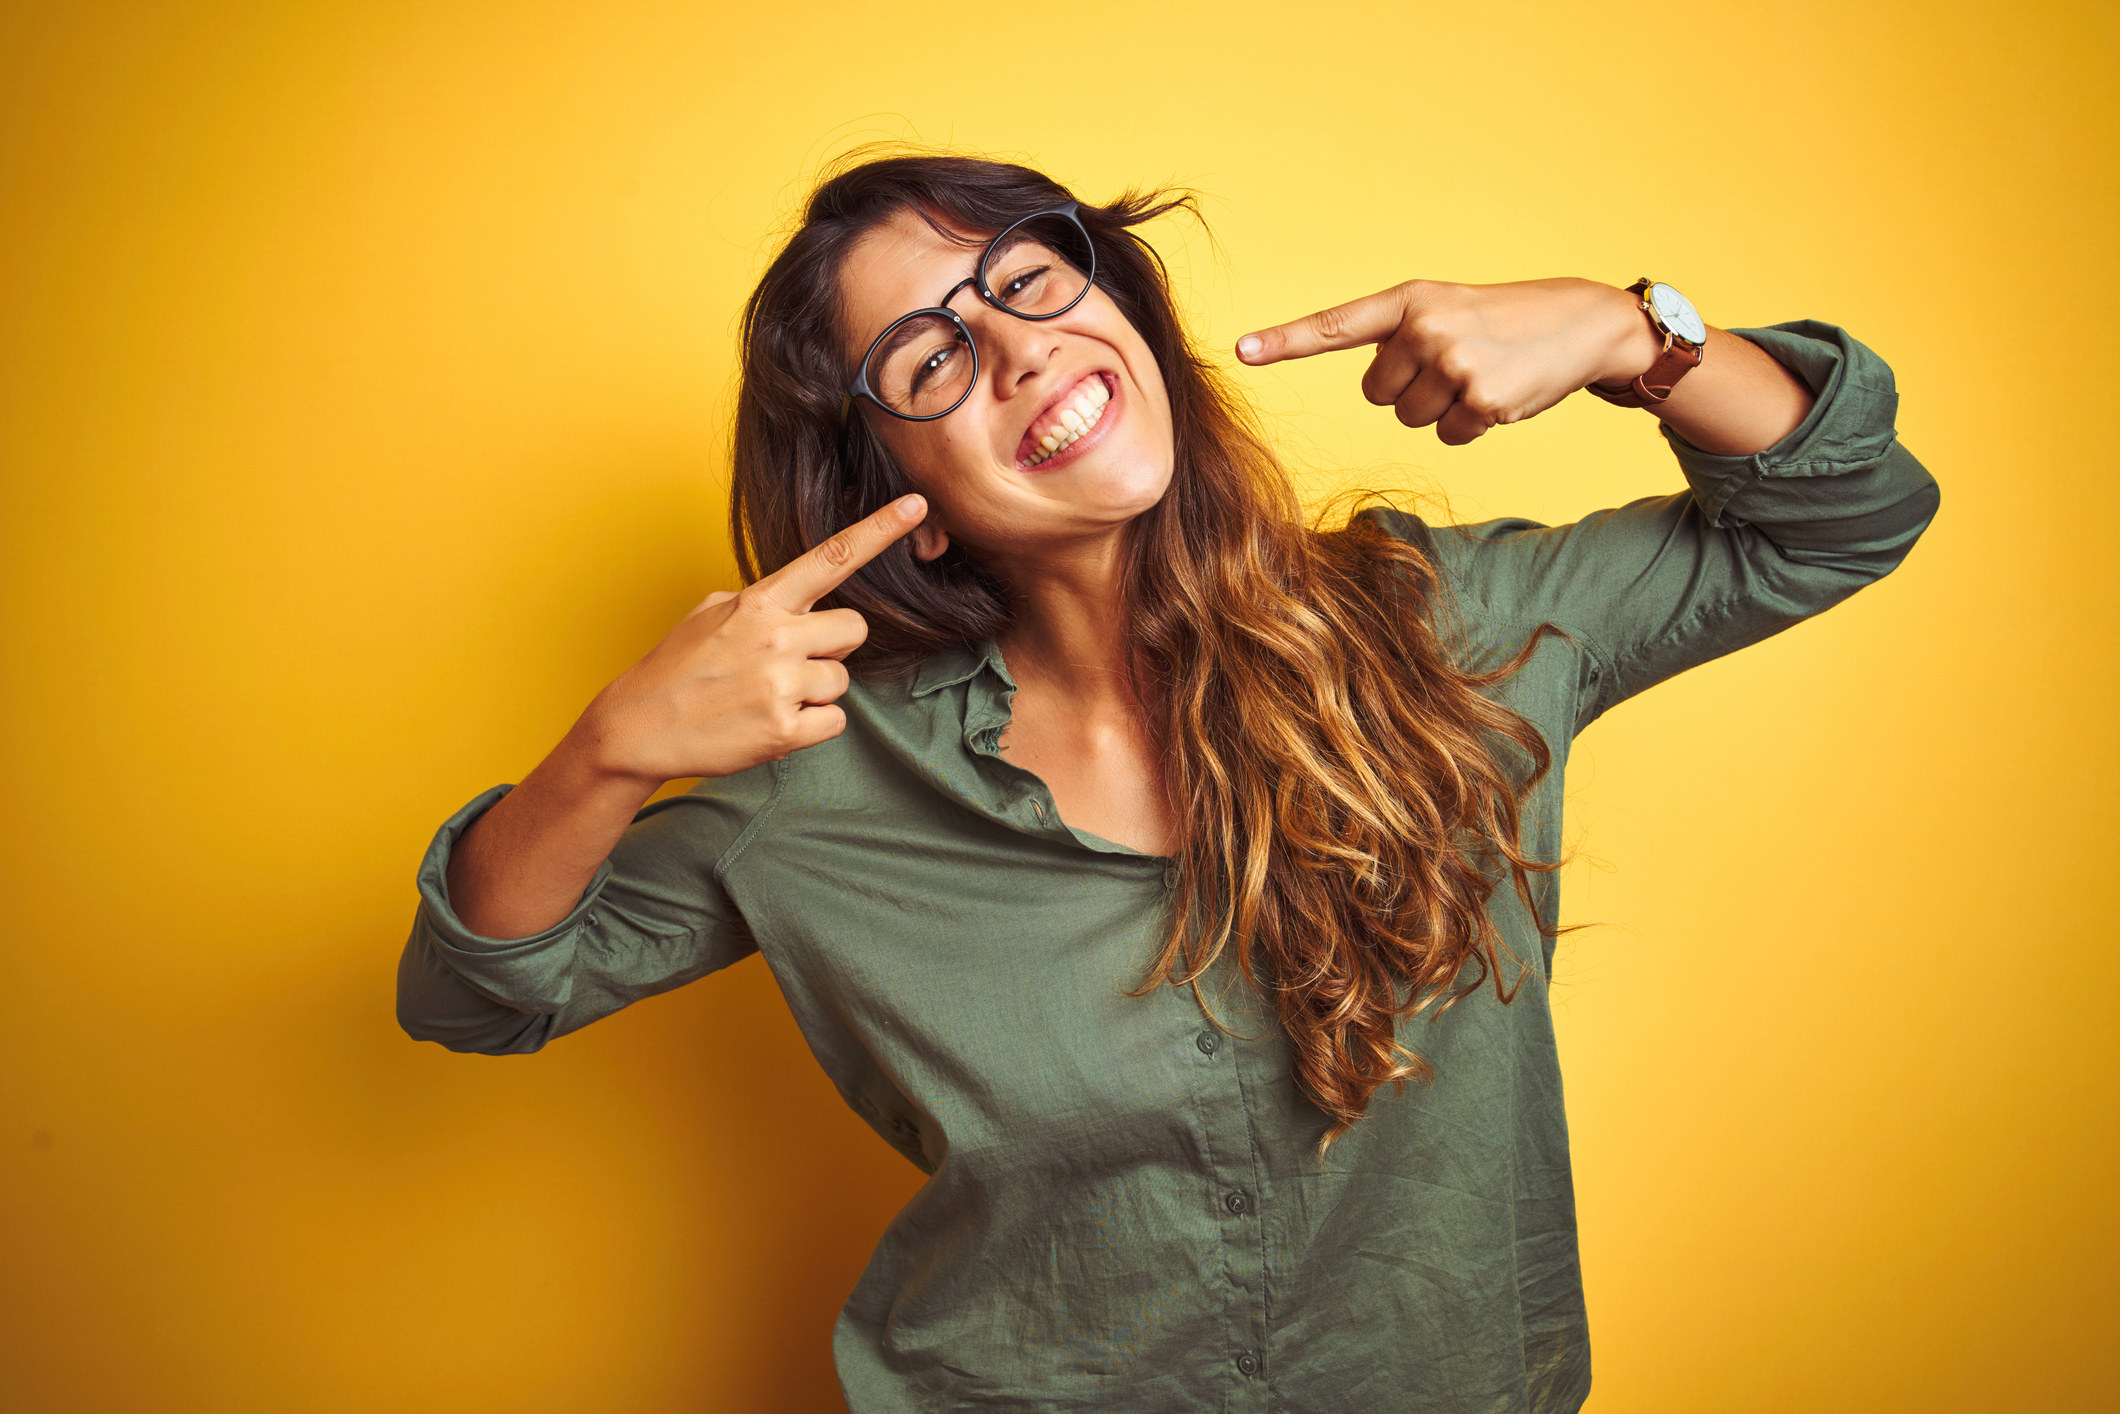 A stock image of a woman smiling while using her hands to point to her smile